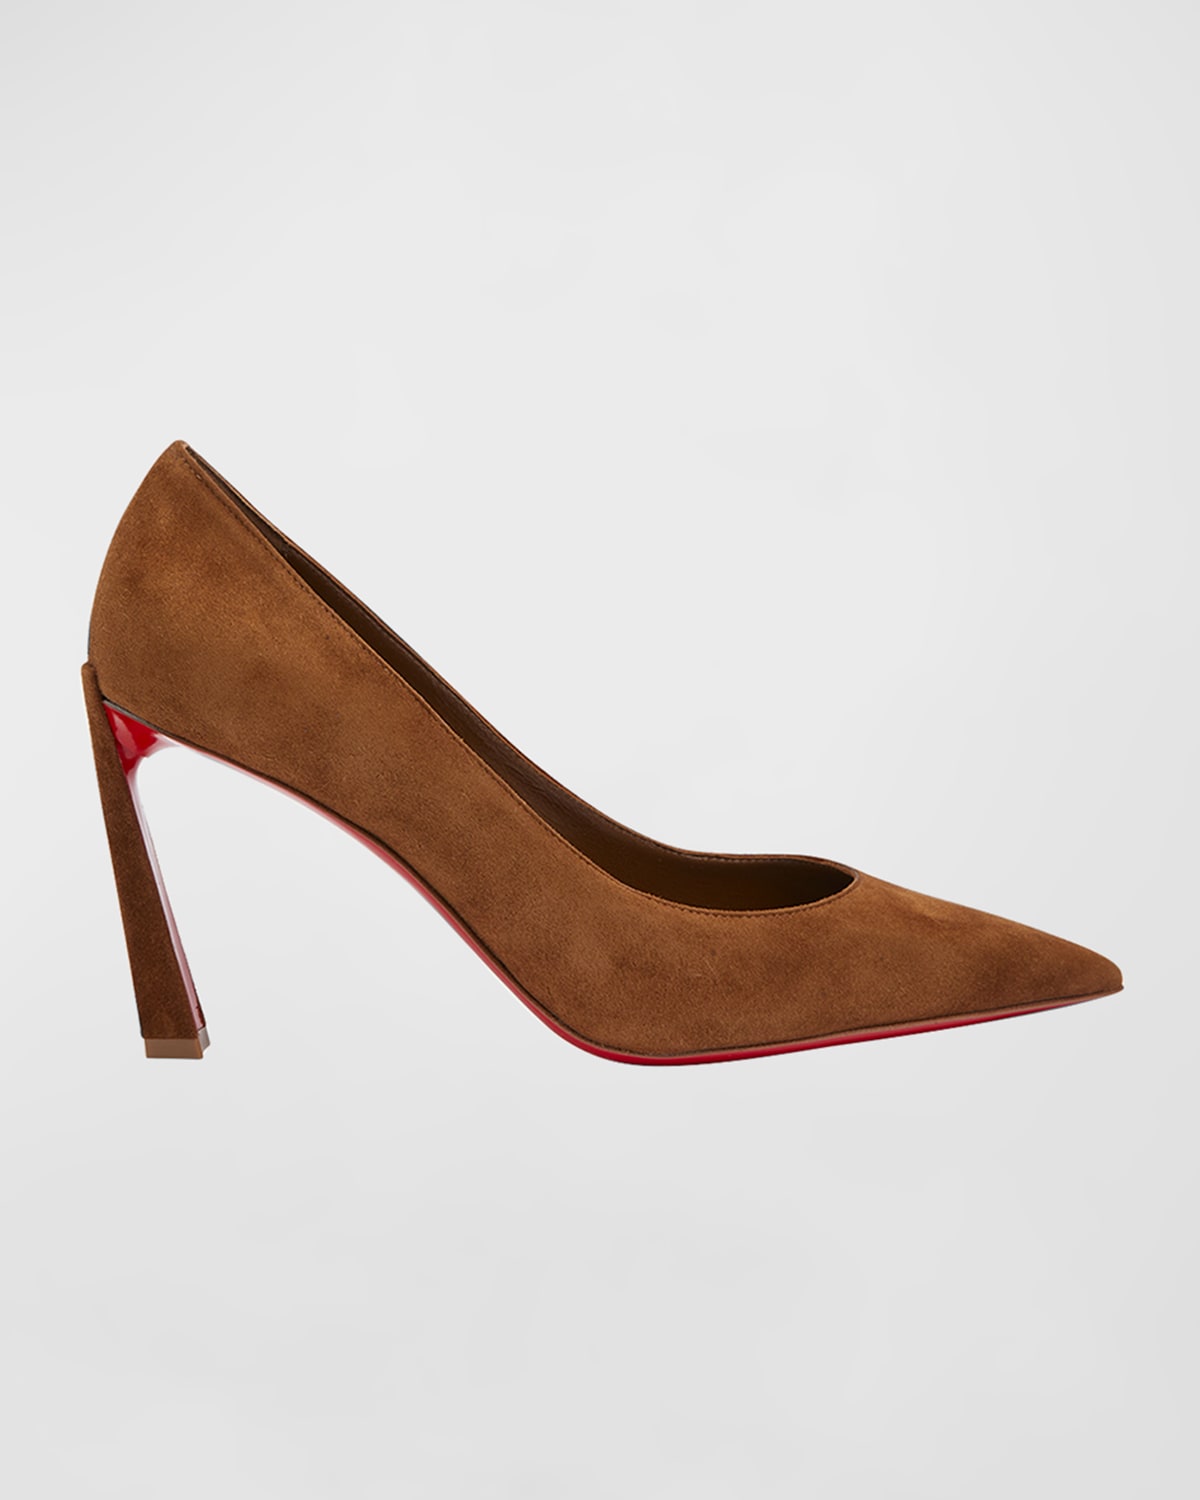 CHRISTIAN LOUBOUTIN CONDORA SUEDE RED SOLE PUMPS